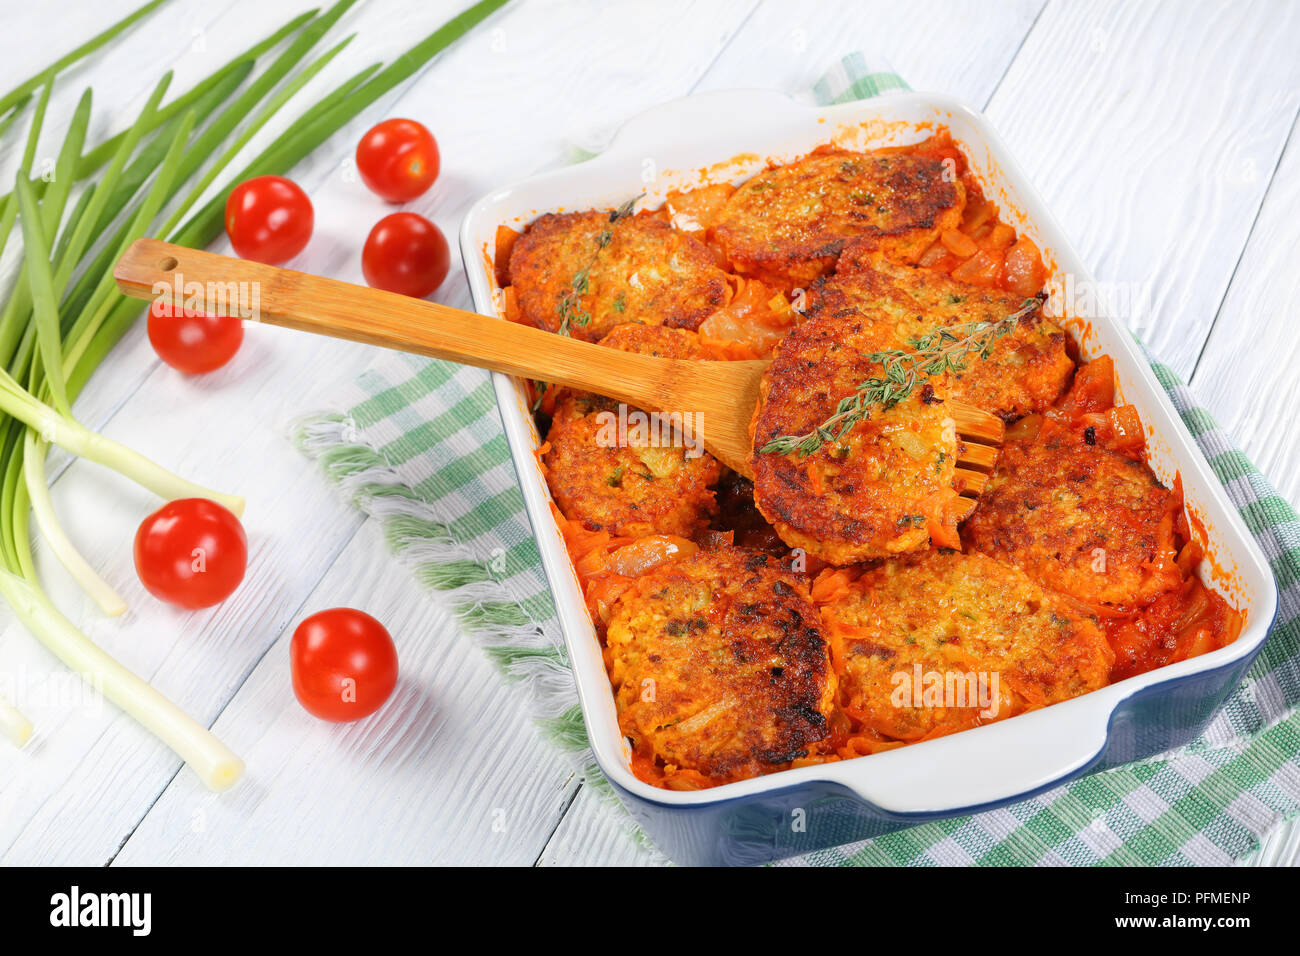 couscous fish patties with onion, carrots and tomato sauce in baking dish with green onion and tomatoes on wooden table, healthy and easy recipe, view Stock Photo